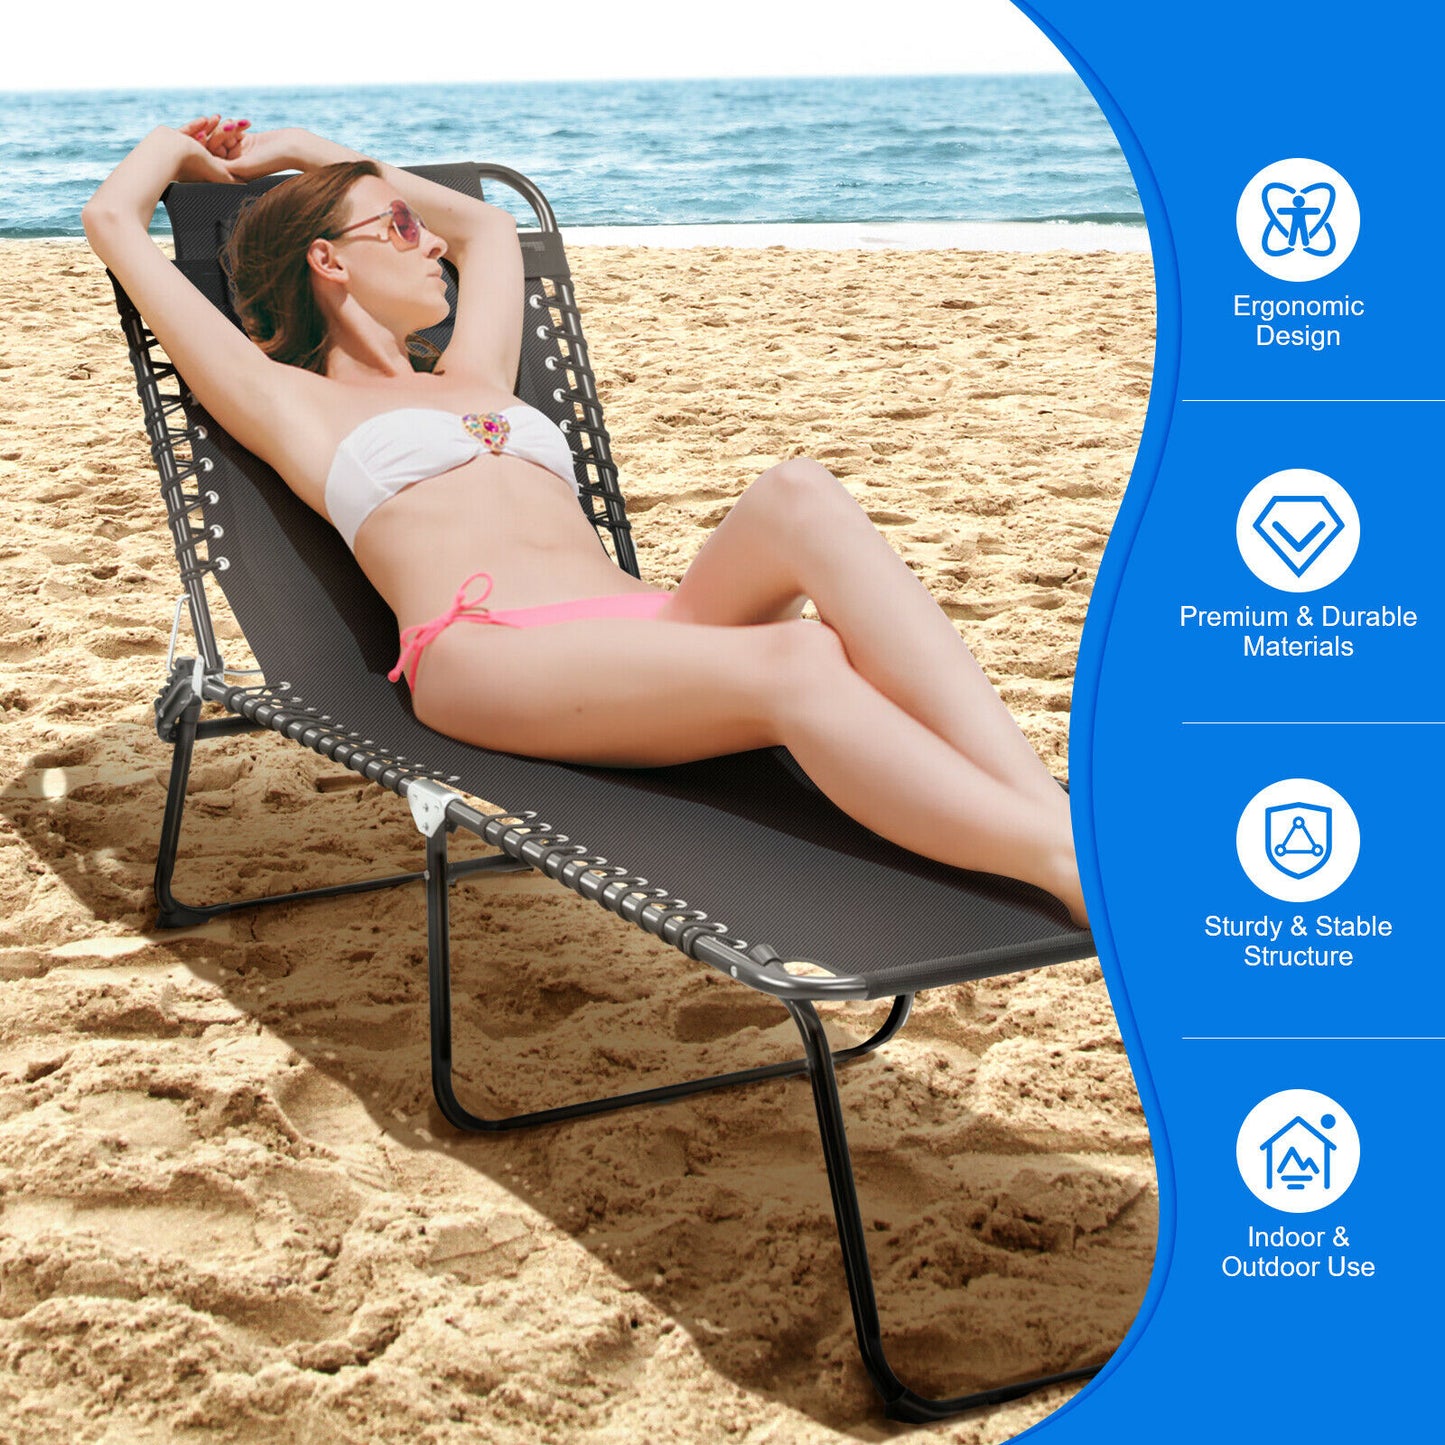 Lounge Chair With 4 Level Backrest Heightening Design